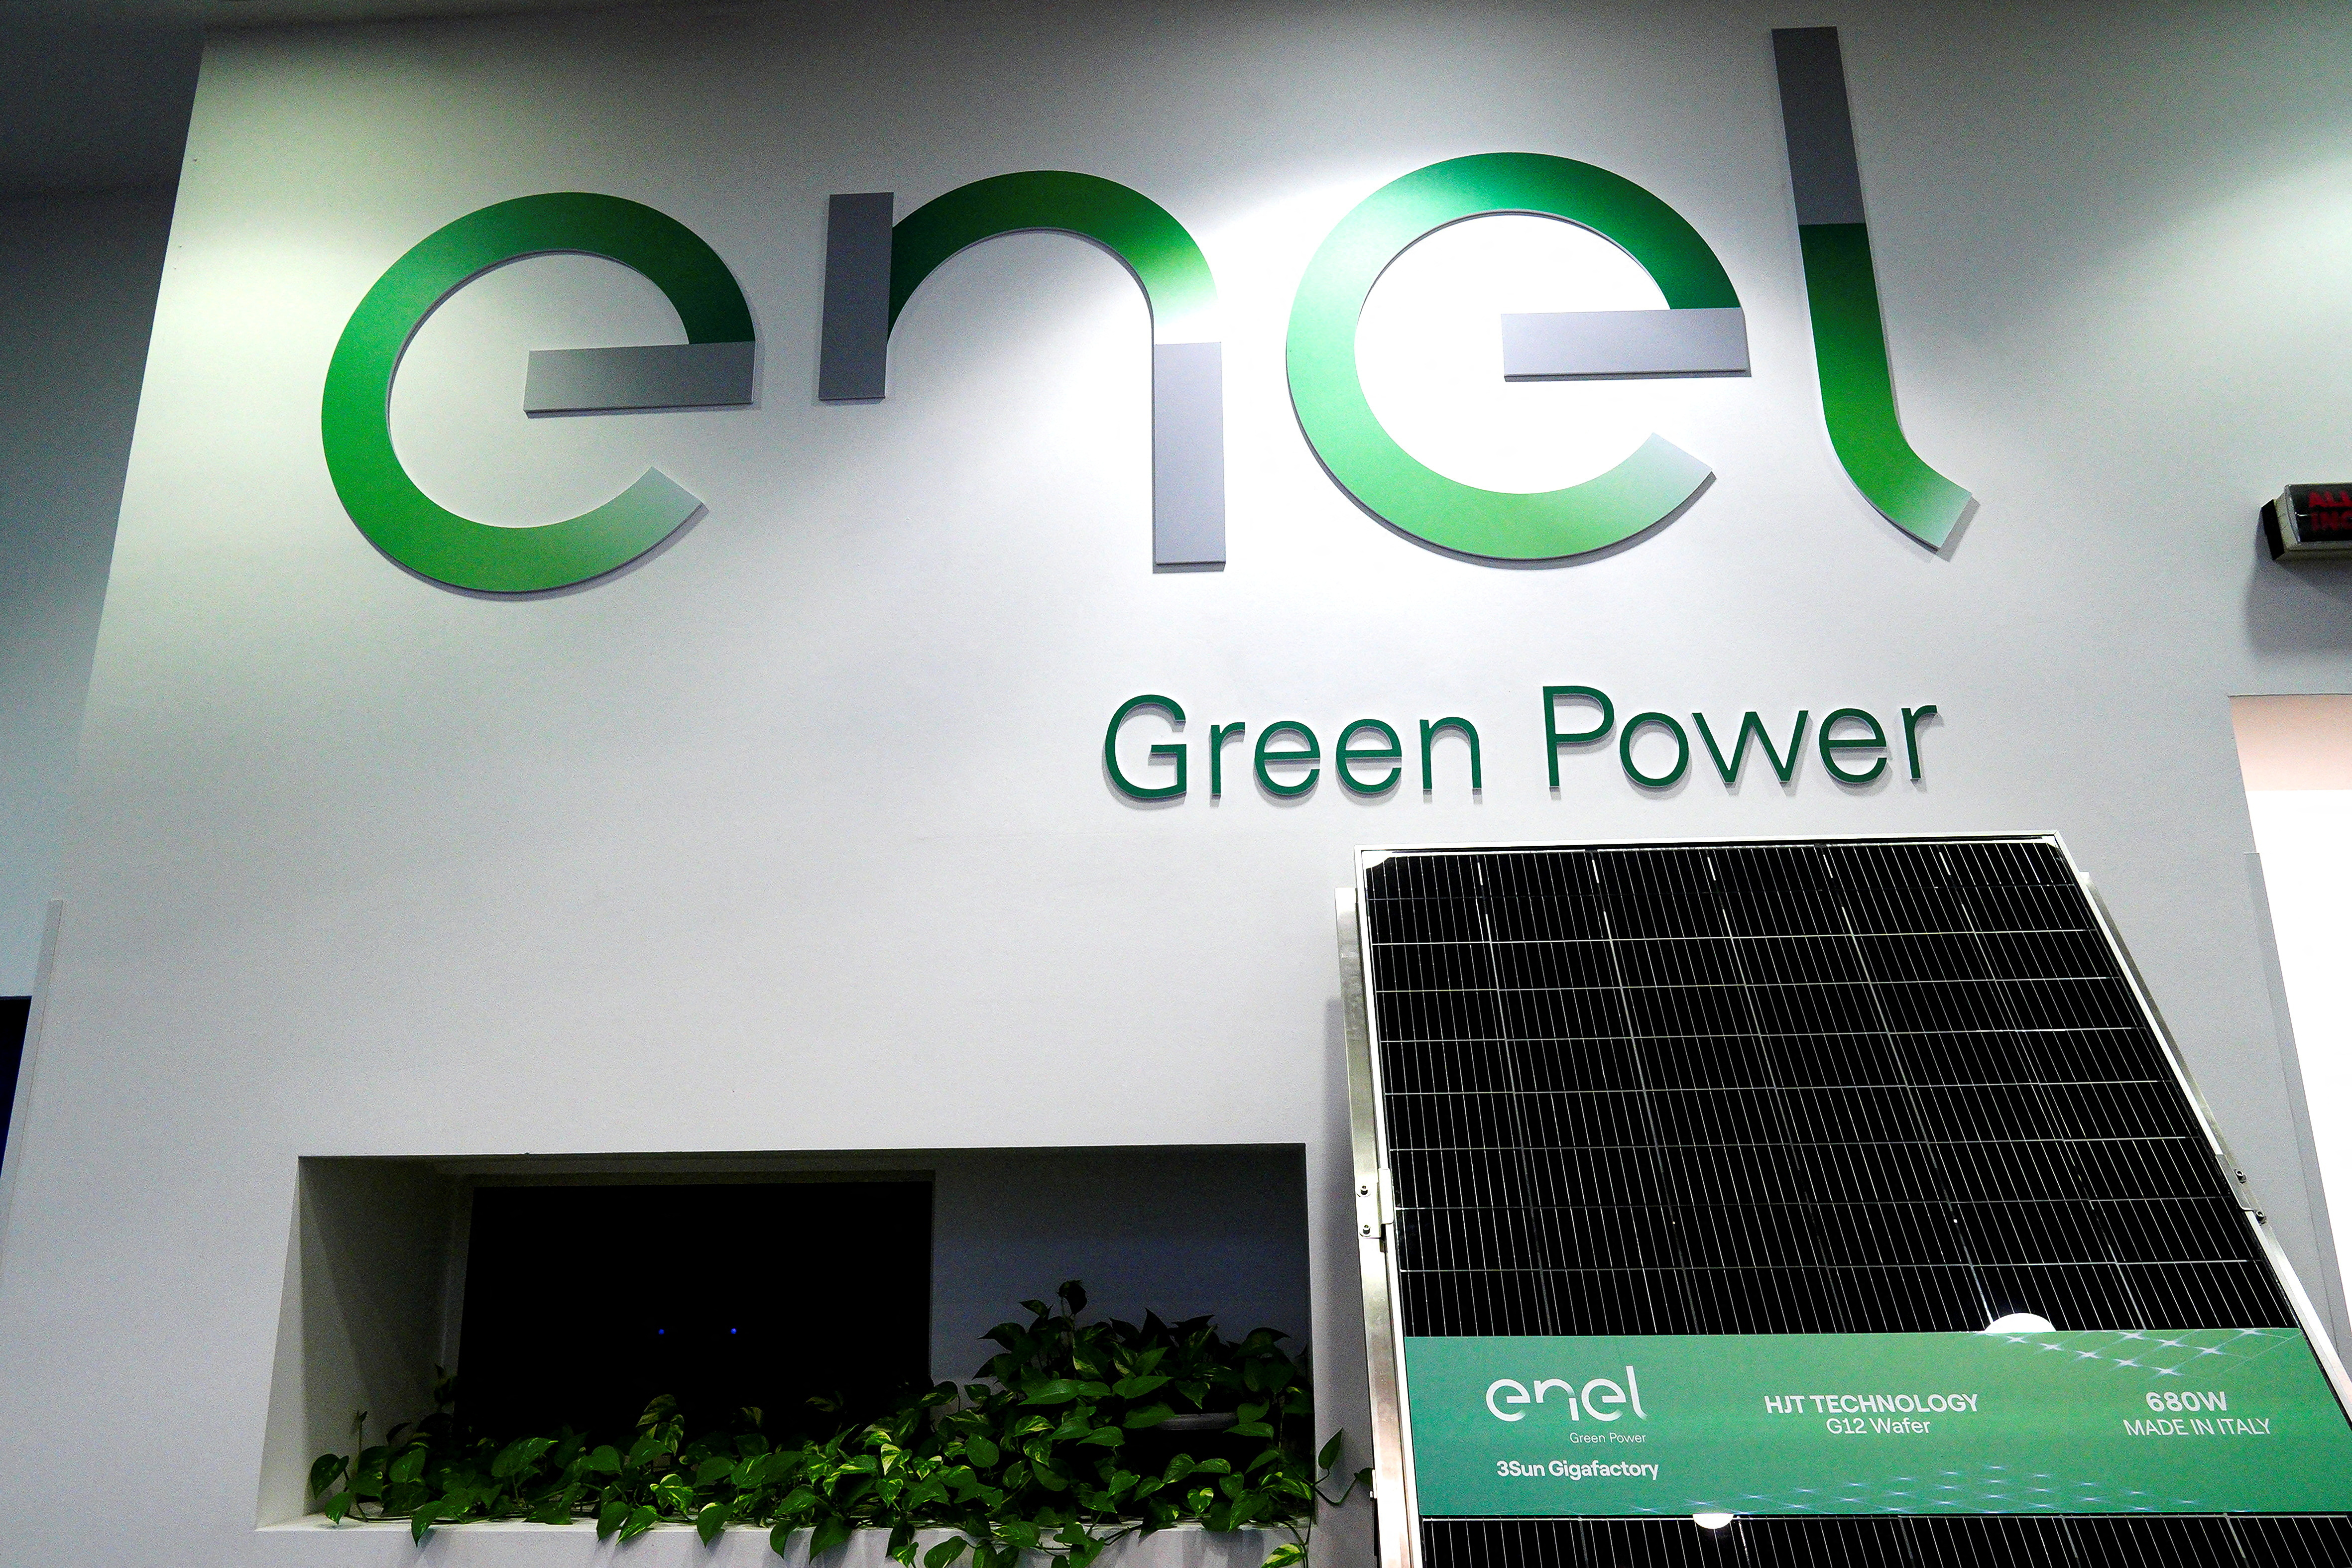 Enel Green Power Logo on a Commercial Stand. it is a Multinational